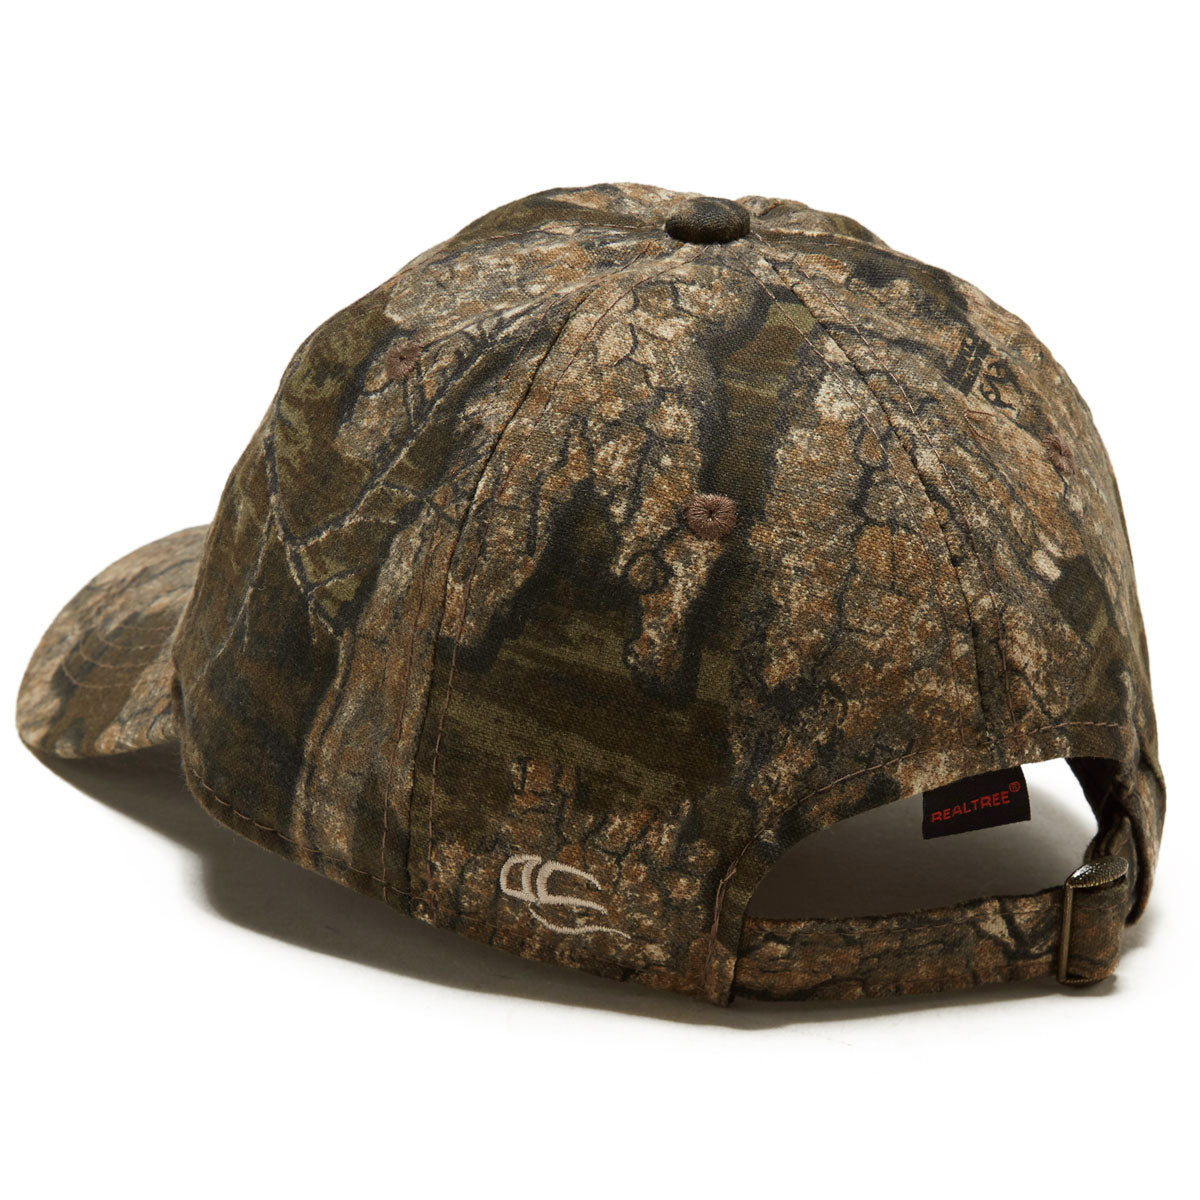 CCS x Realtree Embroidered Mailorder Hat - Timber image 2